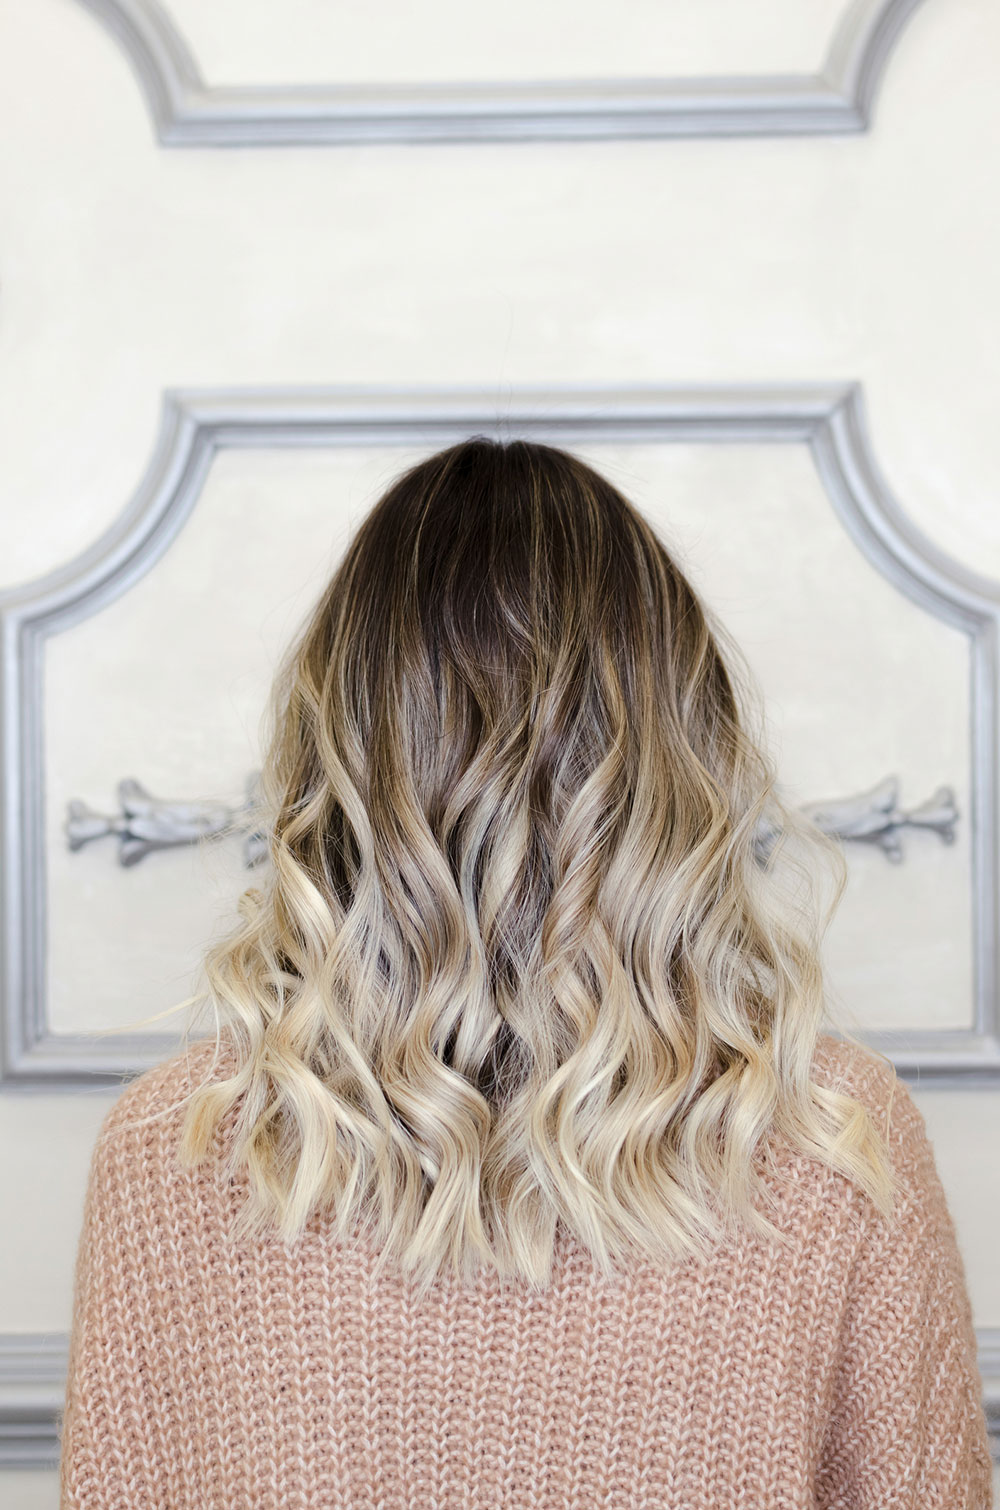 The brassy balayage brown to blonde ombre